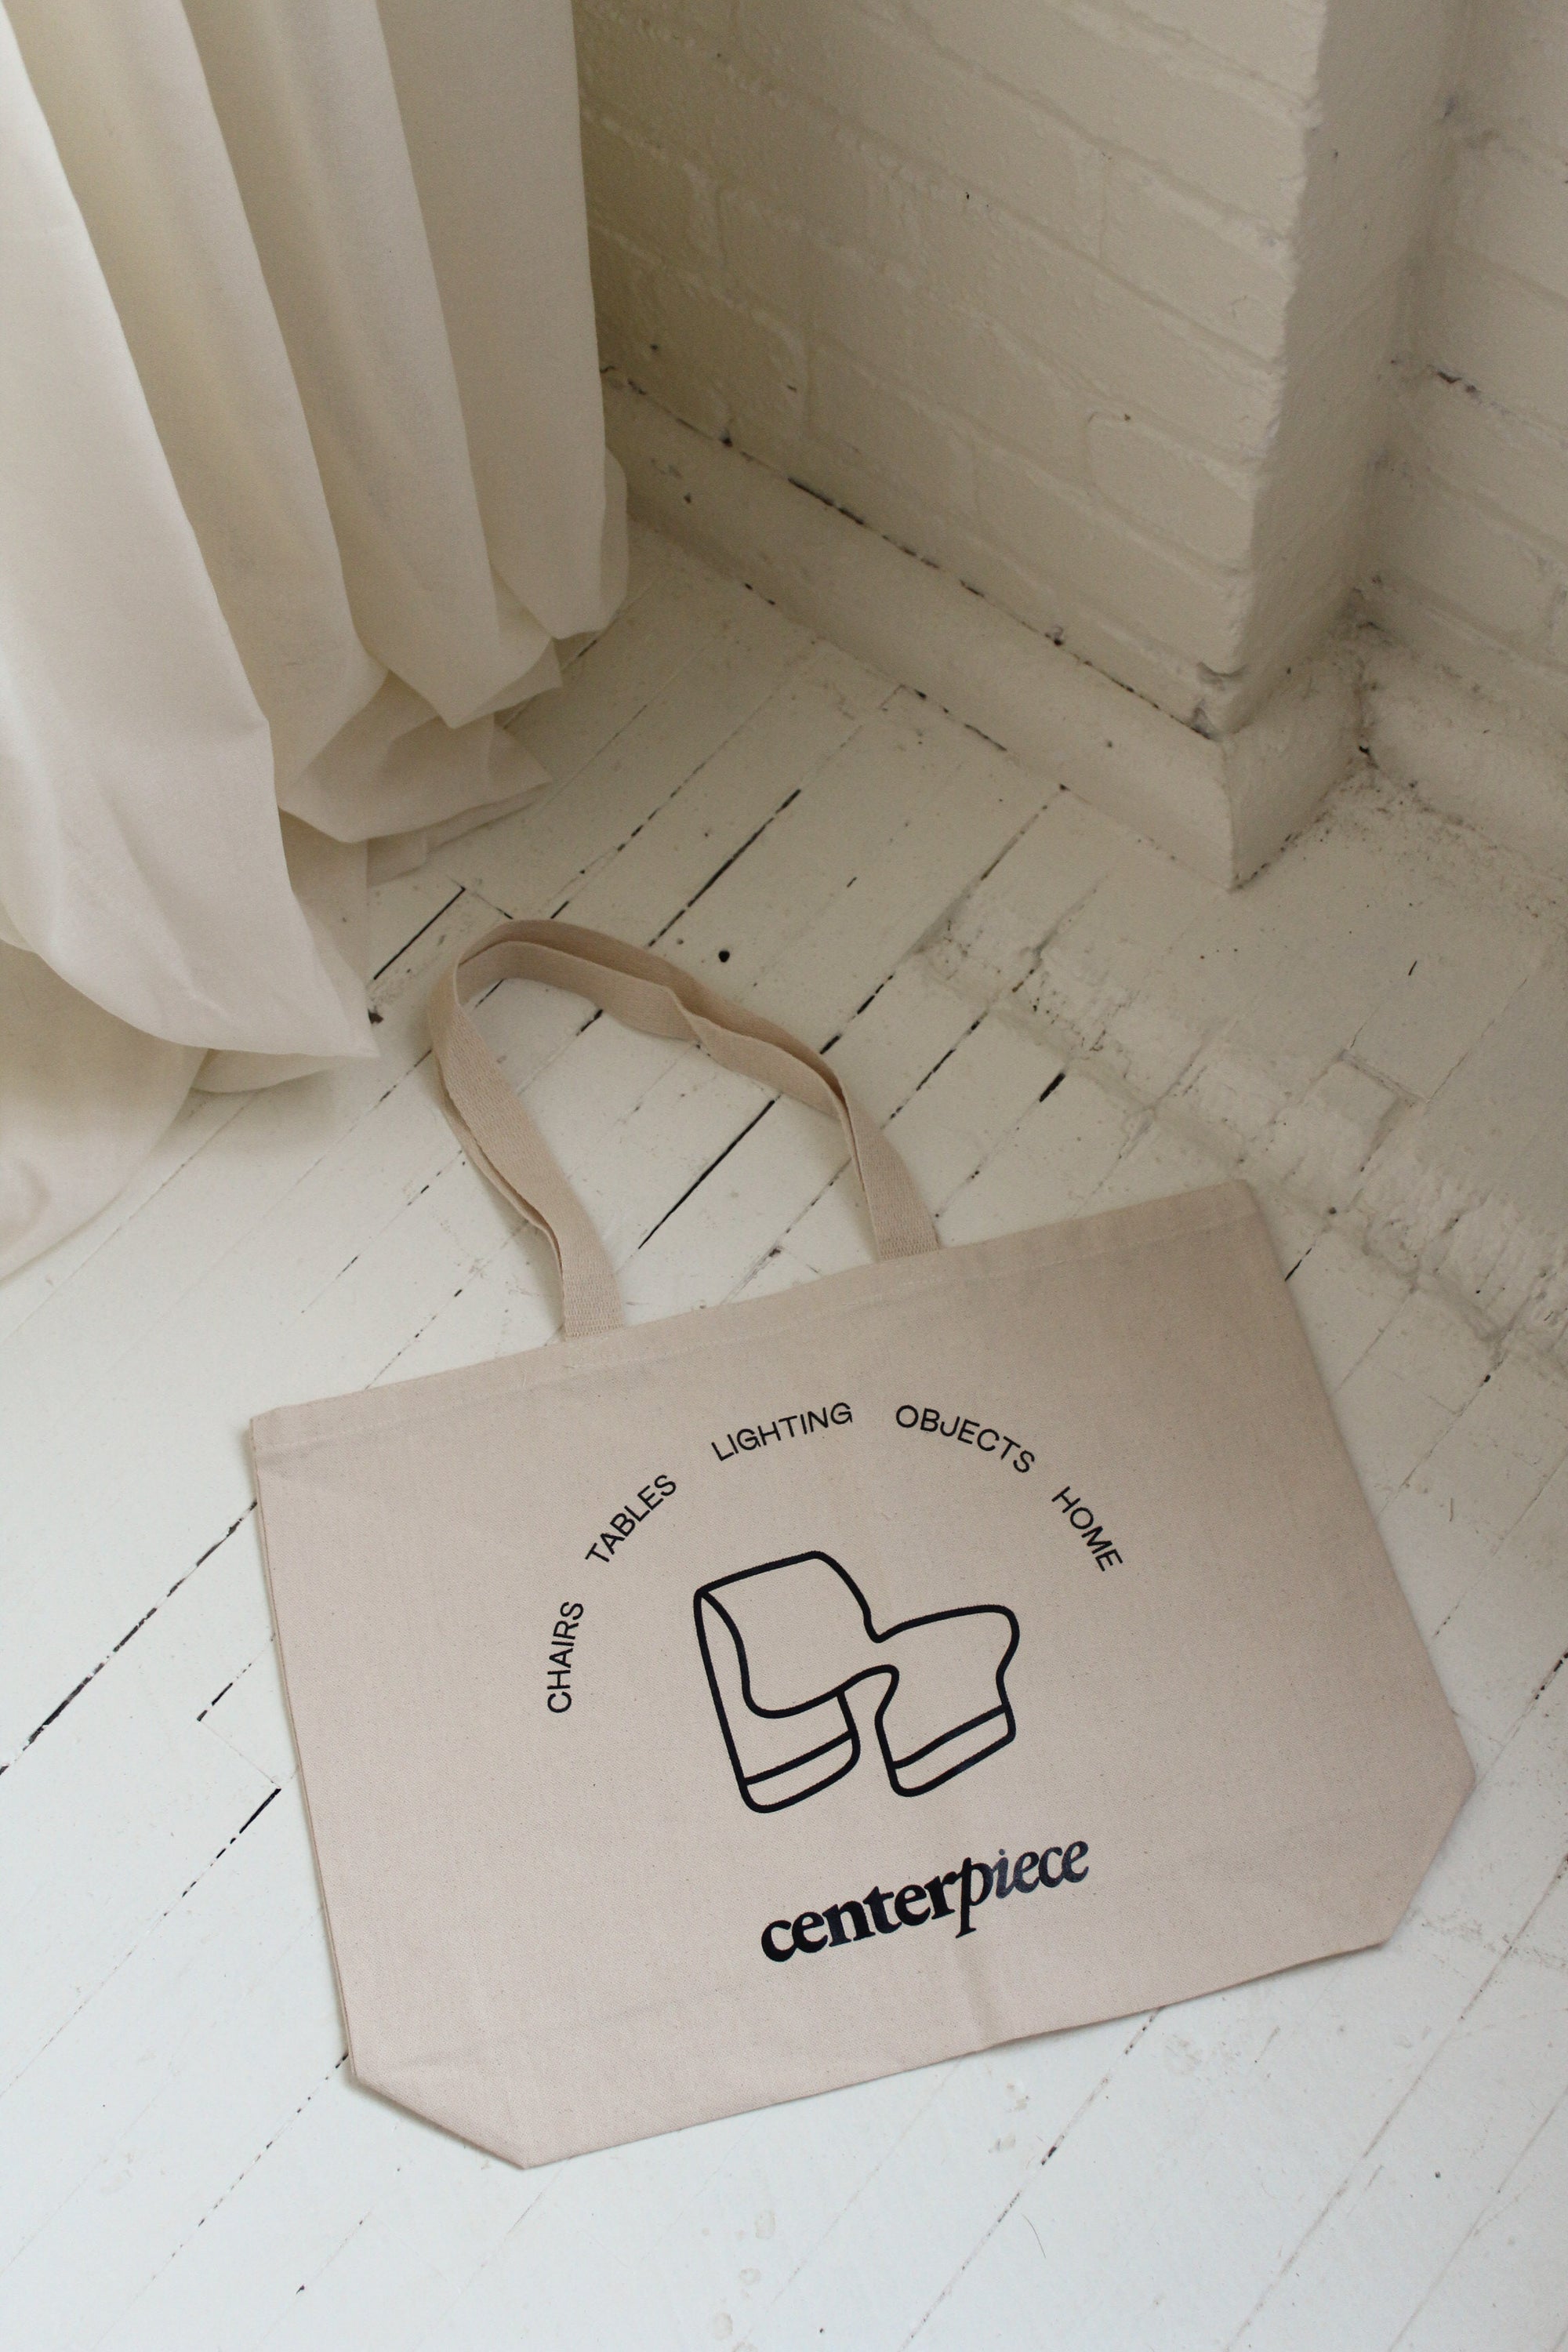 Limited Edition Tote Bag - Le Centerpiece